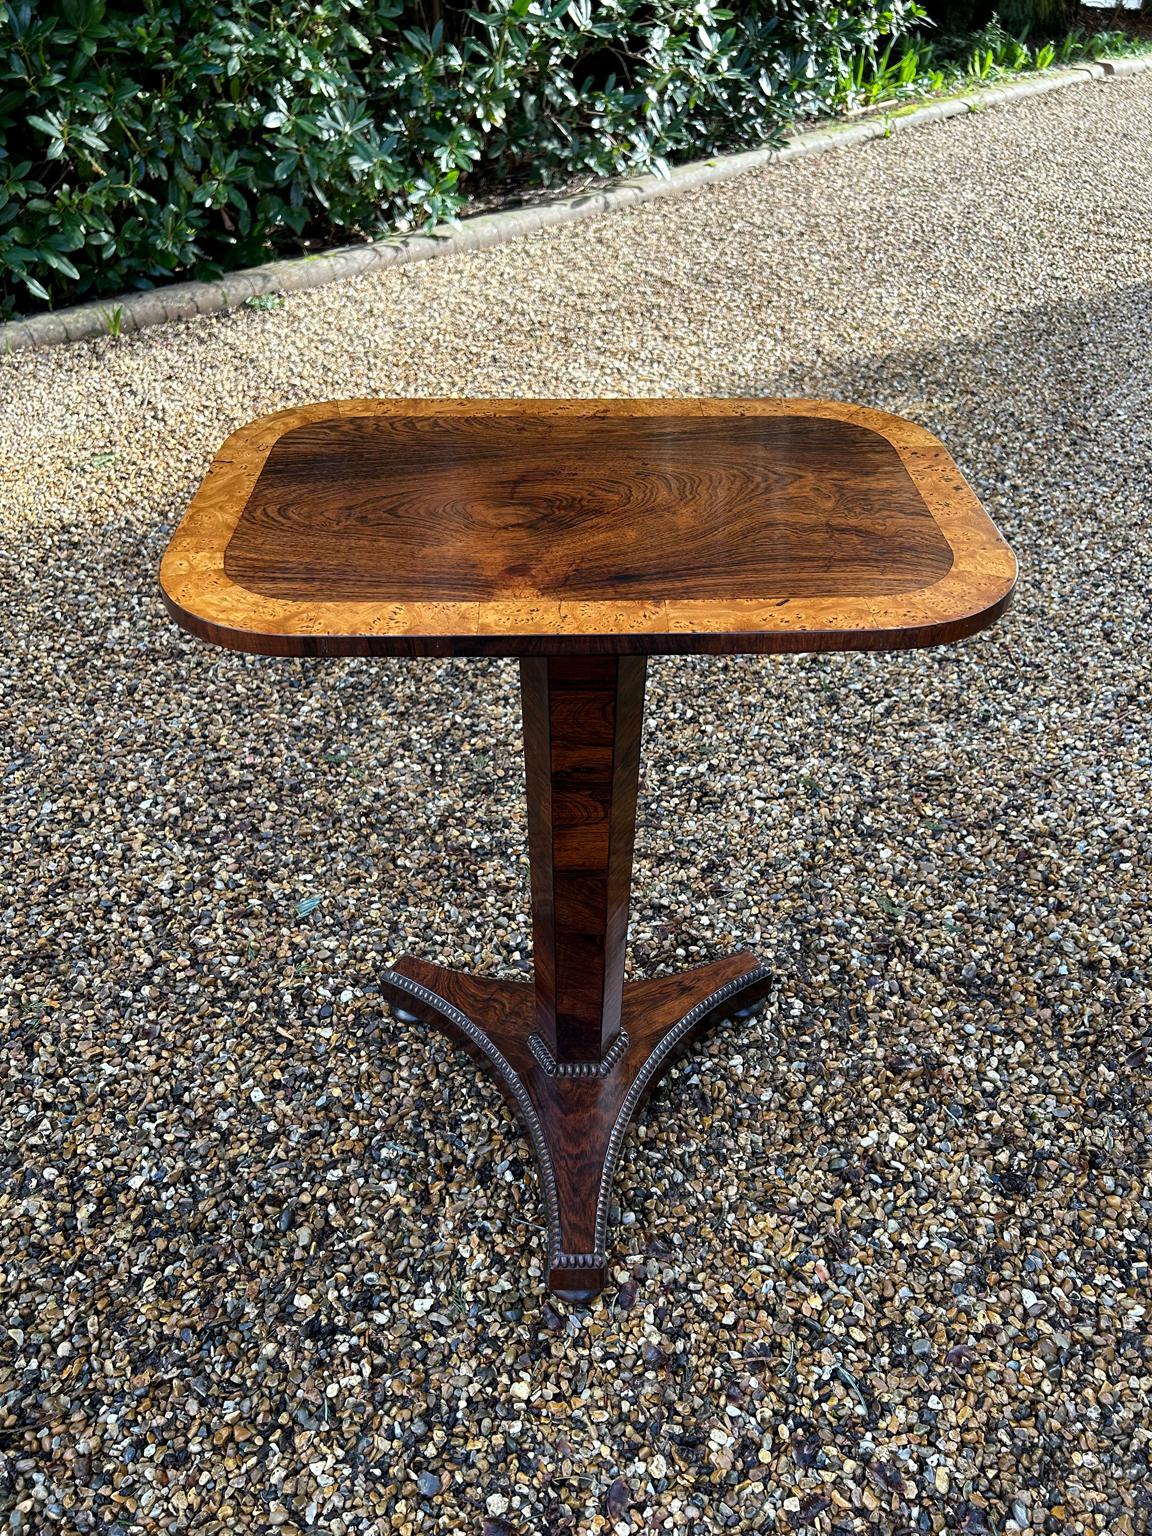 19th Century Regency Rosewood Rectangular Side Table, crossbanded in Pollard Oak, on a hexagonal rosewood column, triform platform and bun feet.

Circa: 1840

Dimensions:
Height:  28 inches – 71 cms
Width: 23 inches – 58 cms
Depth:  15.5 inches – 